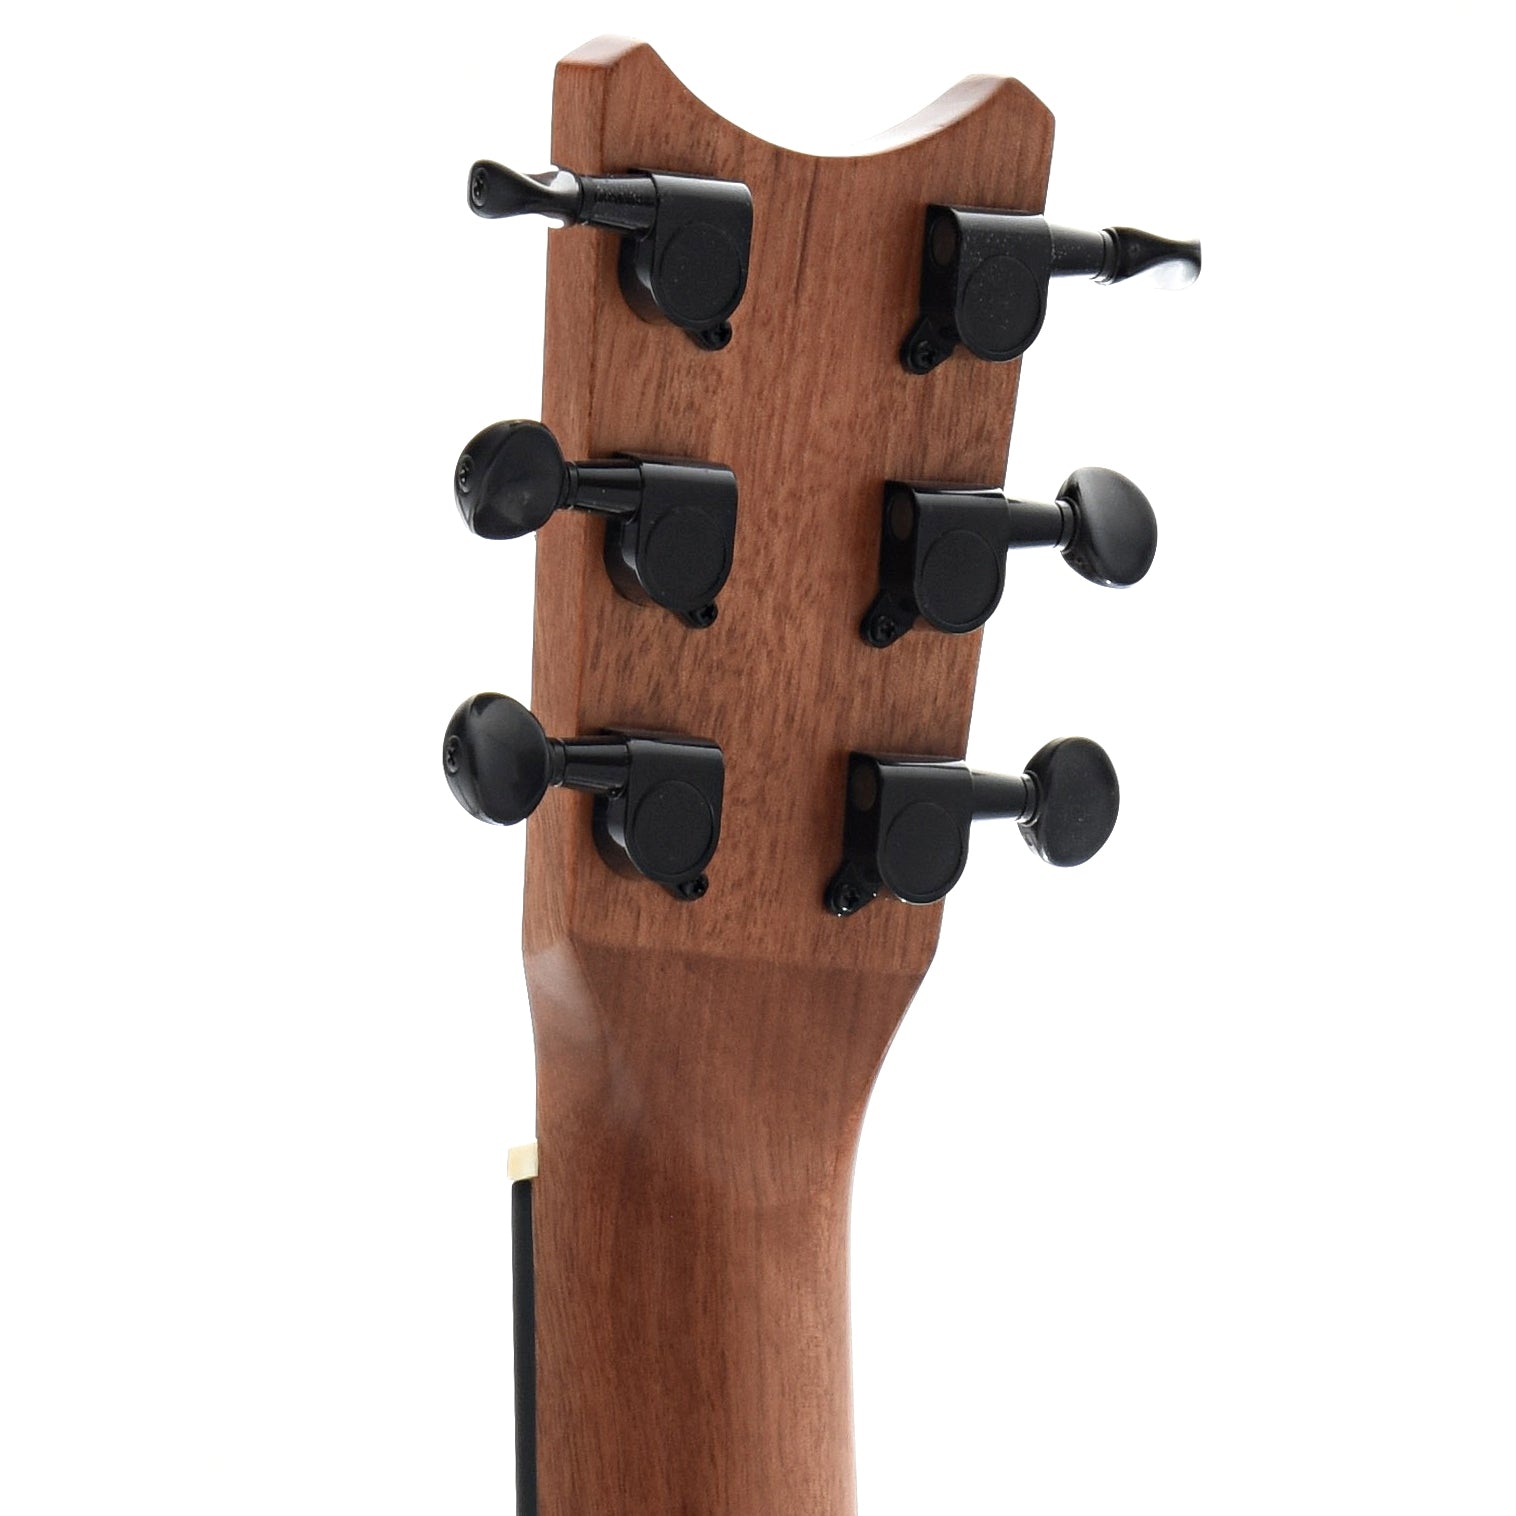 Image 7 of Romero Creations Pepe Romero, SR. Signature Model, Solid Spruce and Mahogany, with Case - SKU# RPR6SM : Product Type Classical & Flamenco Guitars : Elderly Instruments